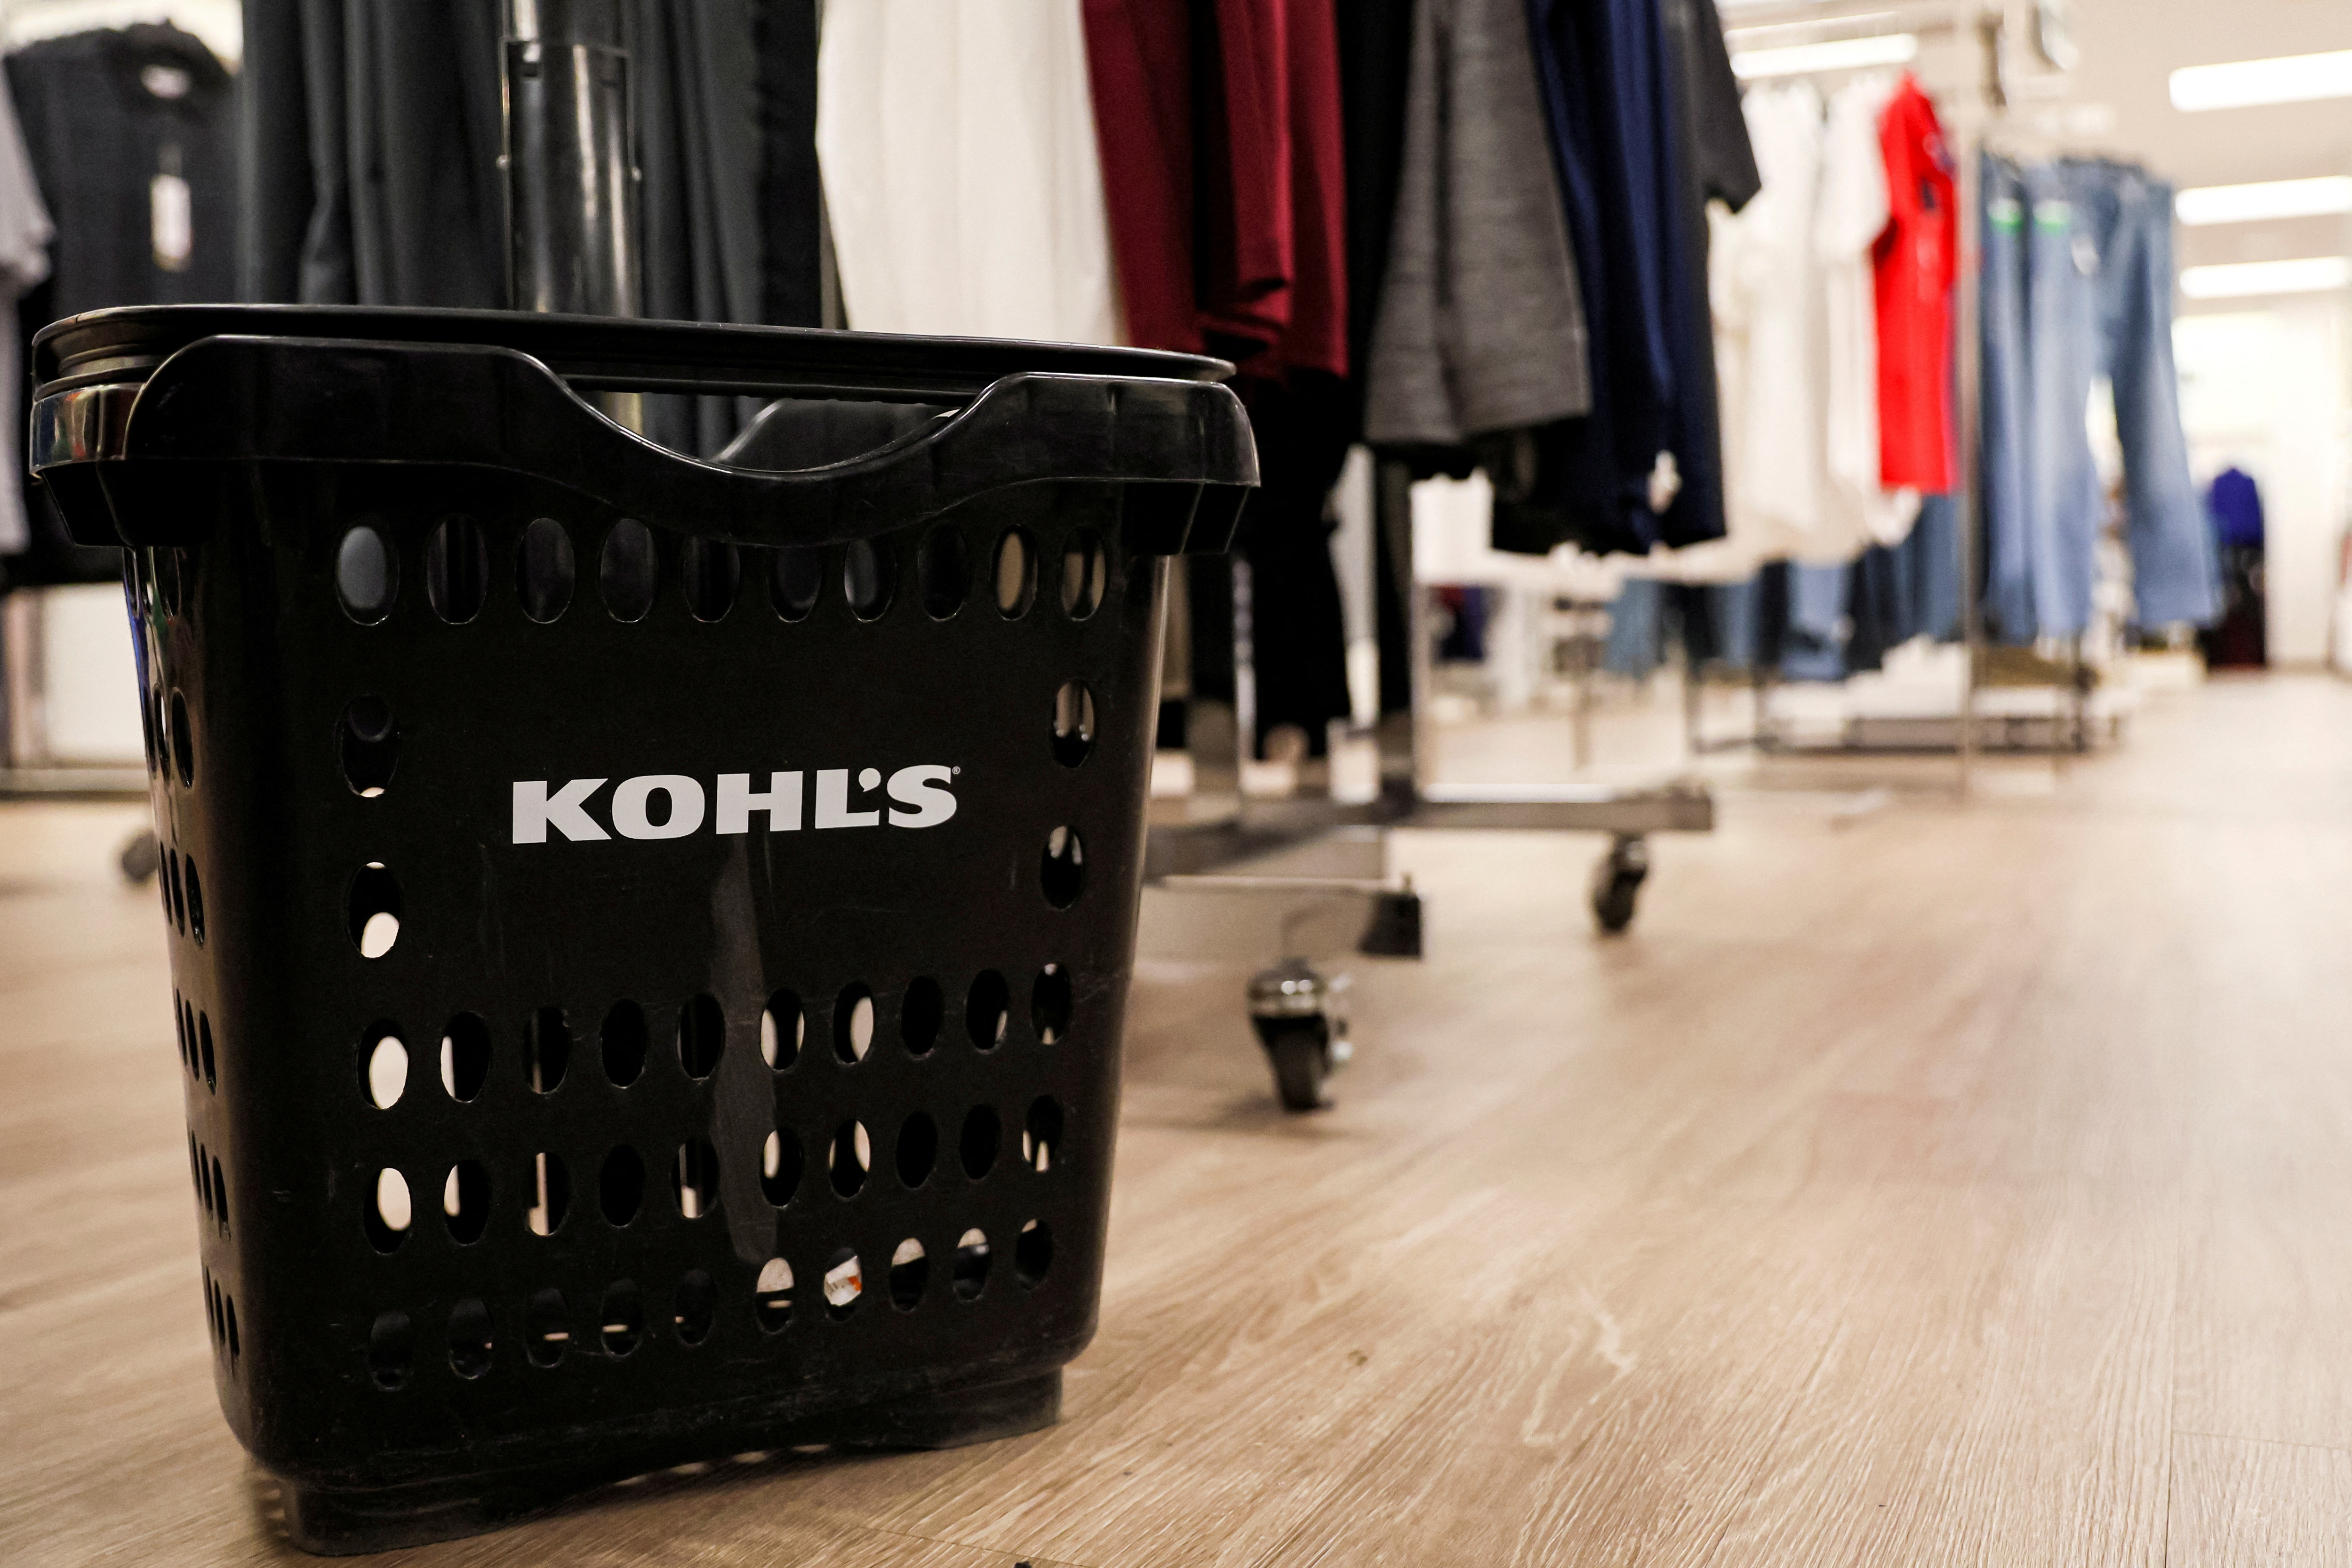 Kohl's CEO pitches retailer's turnaround efforts after surprise